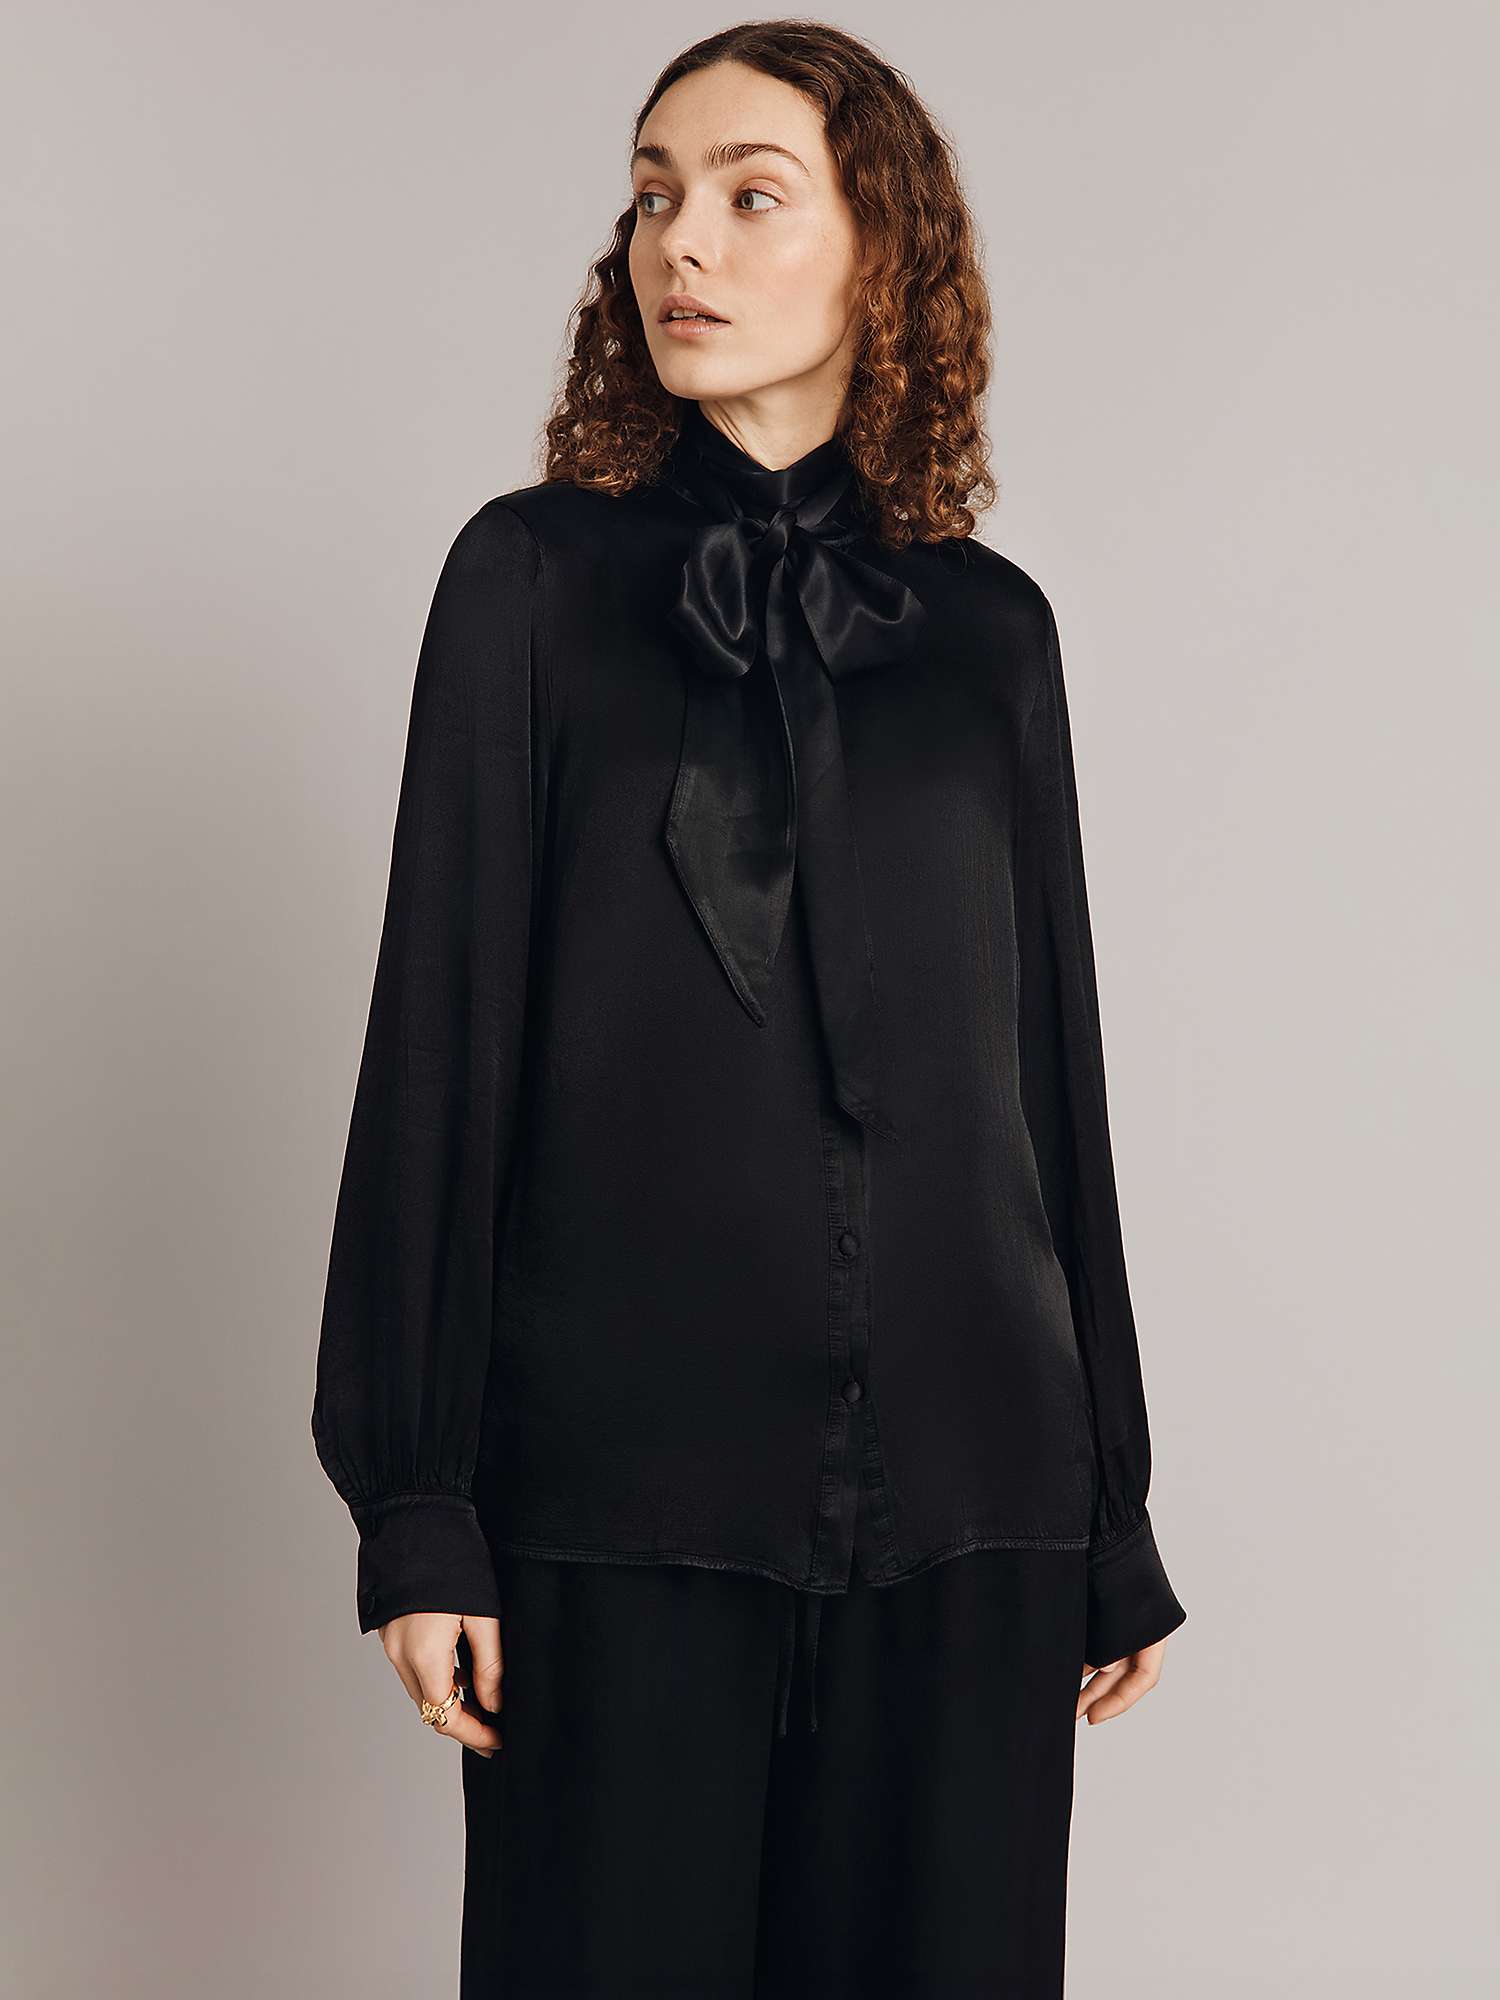 Buy Ghost Anna Pussybow Blouse Online at johnlewis.com